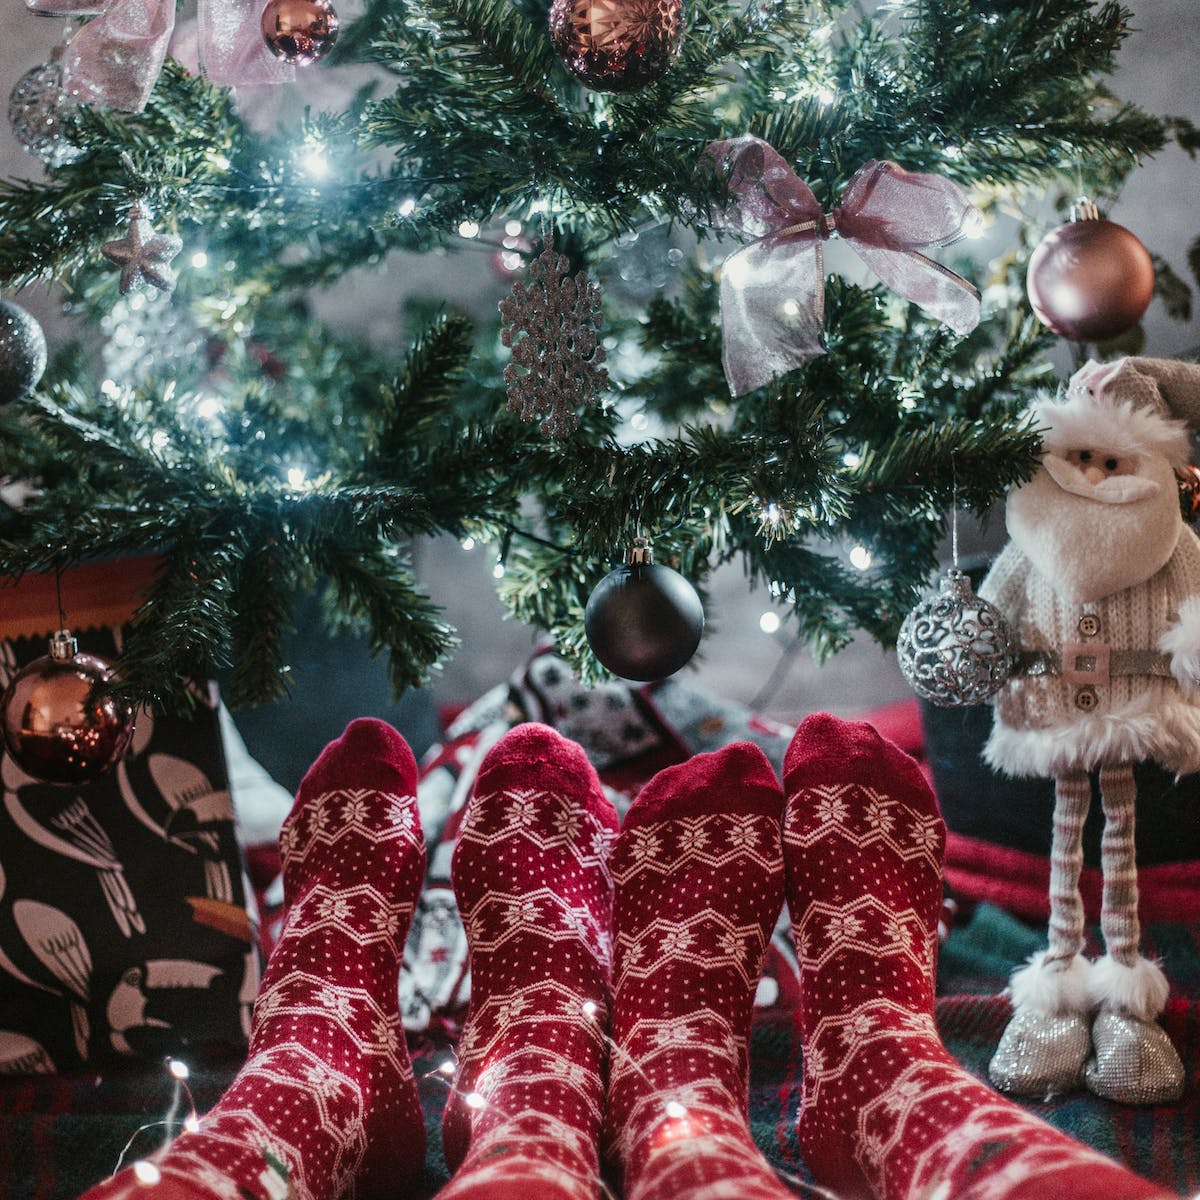 5 Secrets to Building Unbreakable Bonds with Your Partner During the Holidays